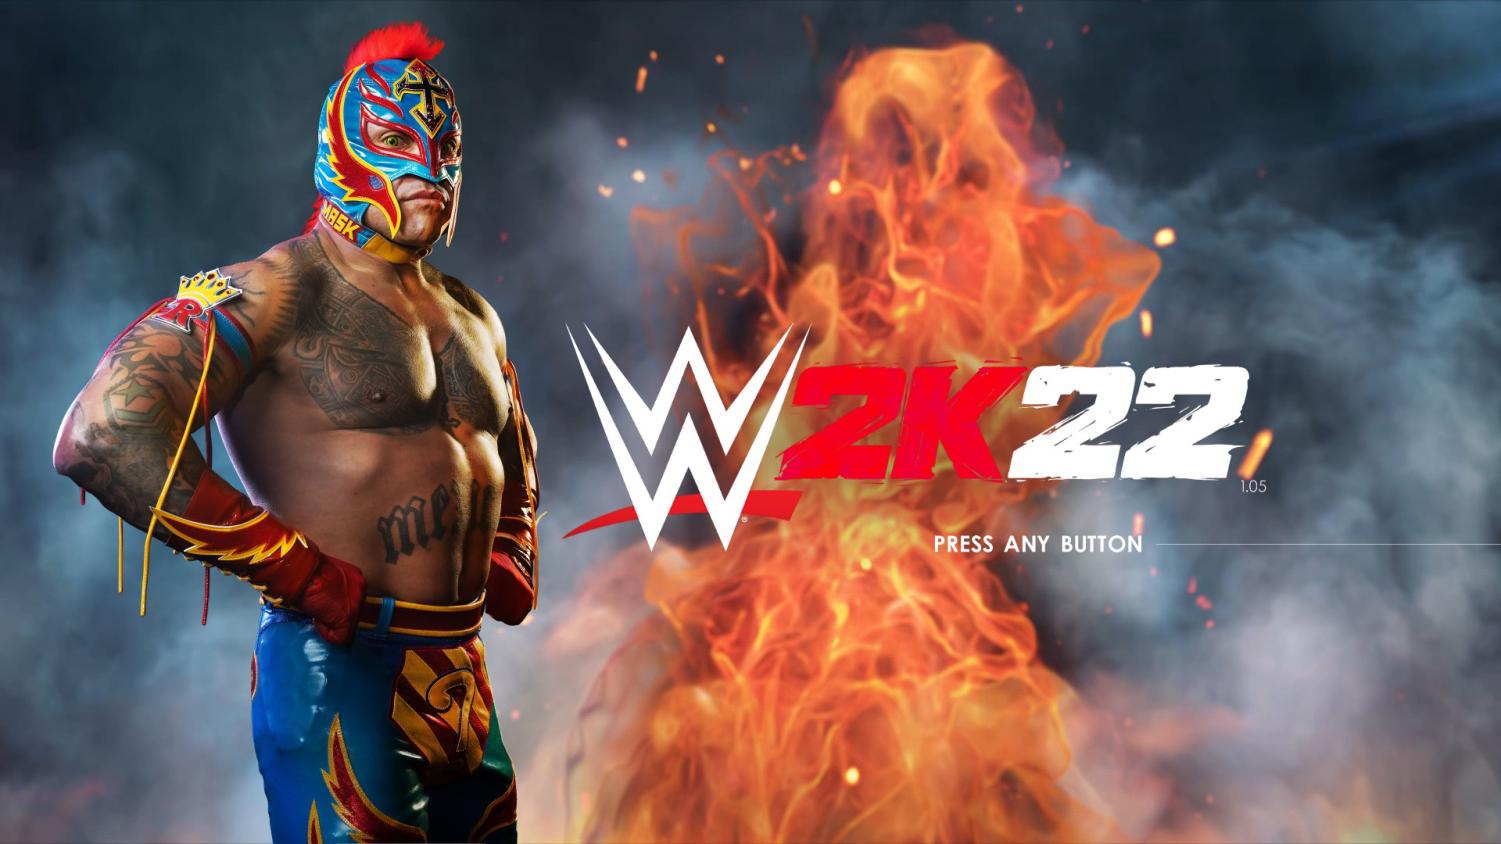 WWE+2K22+Review%3A+A+New+Start